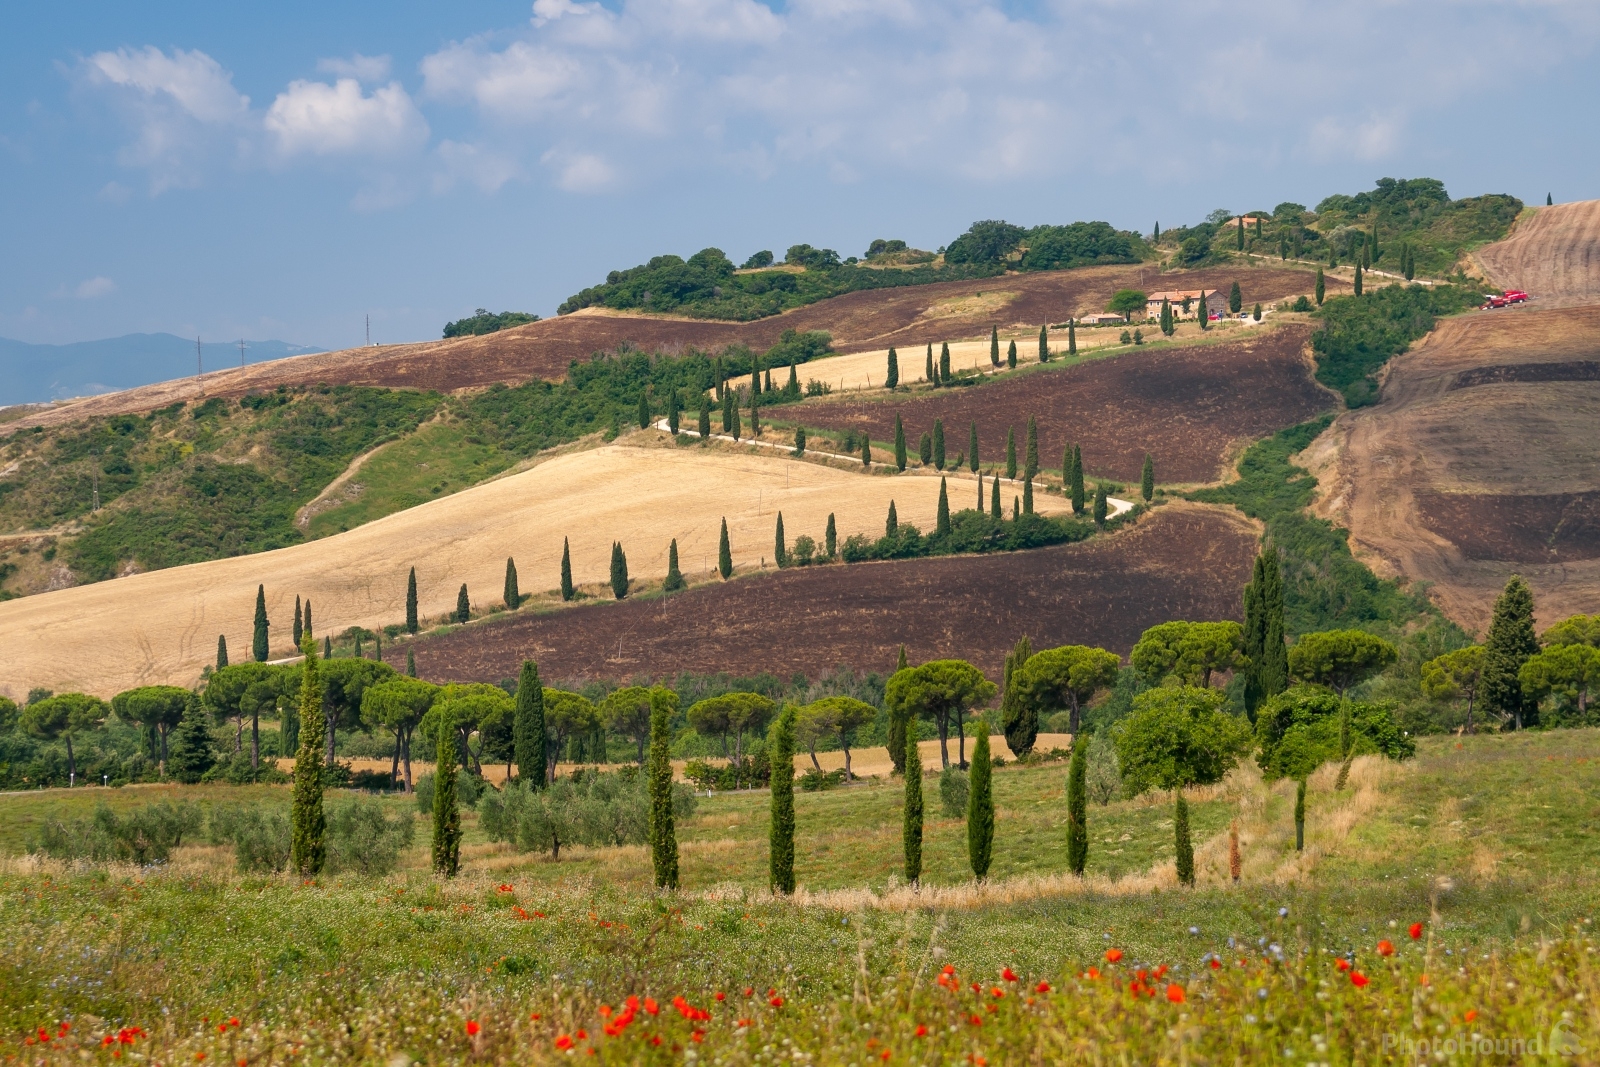 Image of Winding road from the parking by La Foce by VOJTa Herout